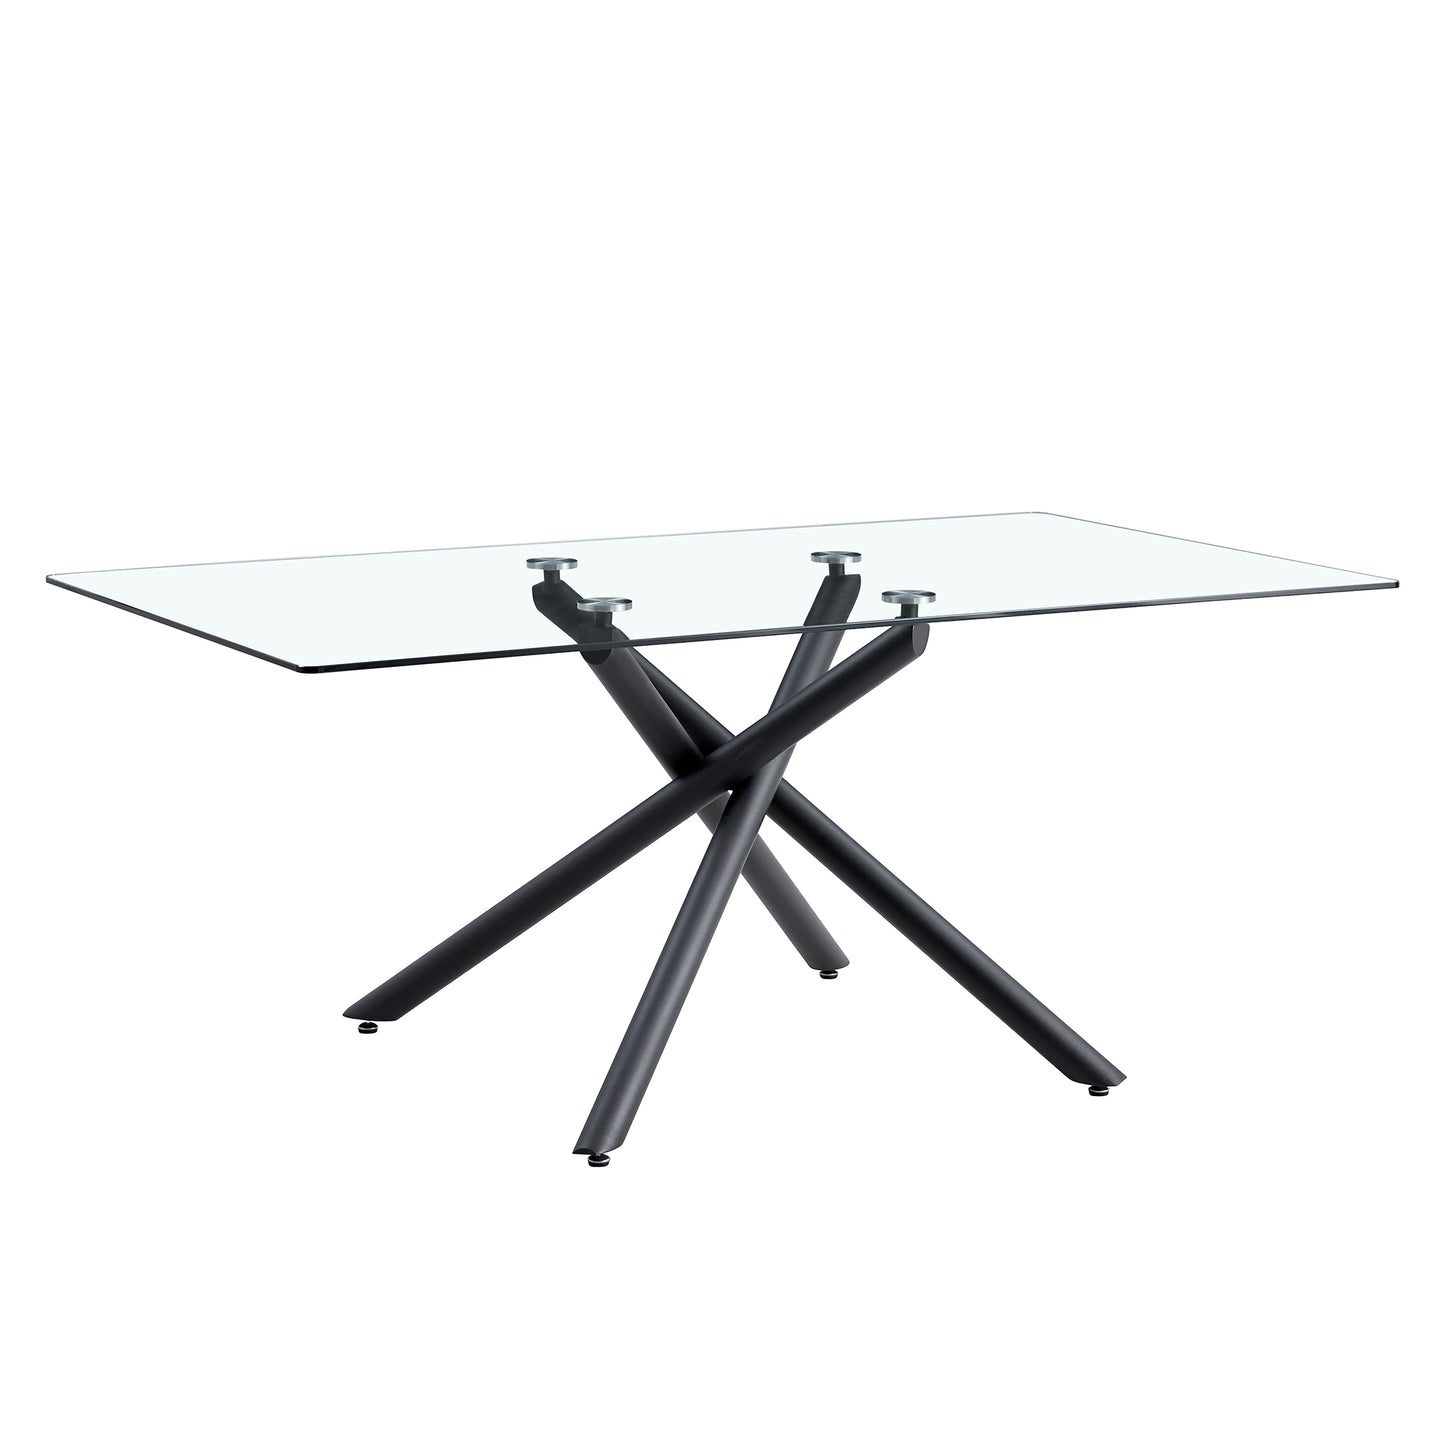 Large Modern Minimalist Rectangular Glass Dining Table for 6-8 with 0.39" Tempered Glass Tabletop and Black color Metal Legs, for Kitchen Dining Living Meeting Room Banquet hall,71" W x 39" D x 301537